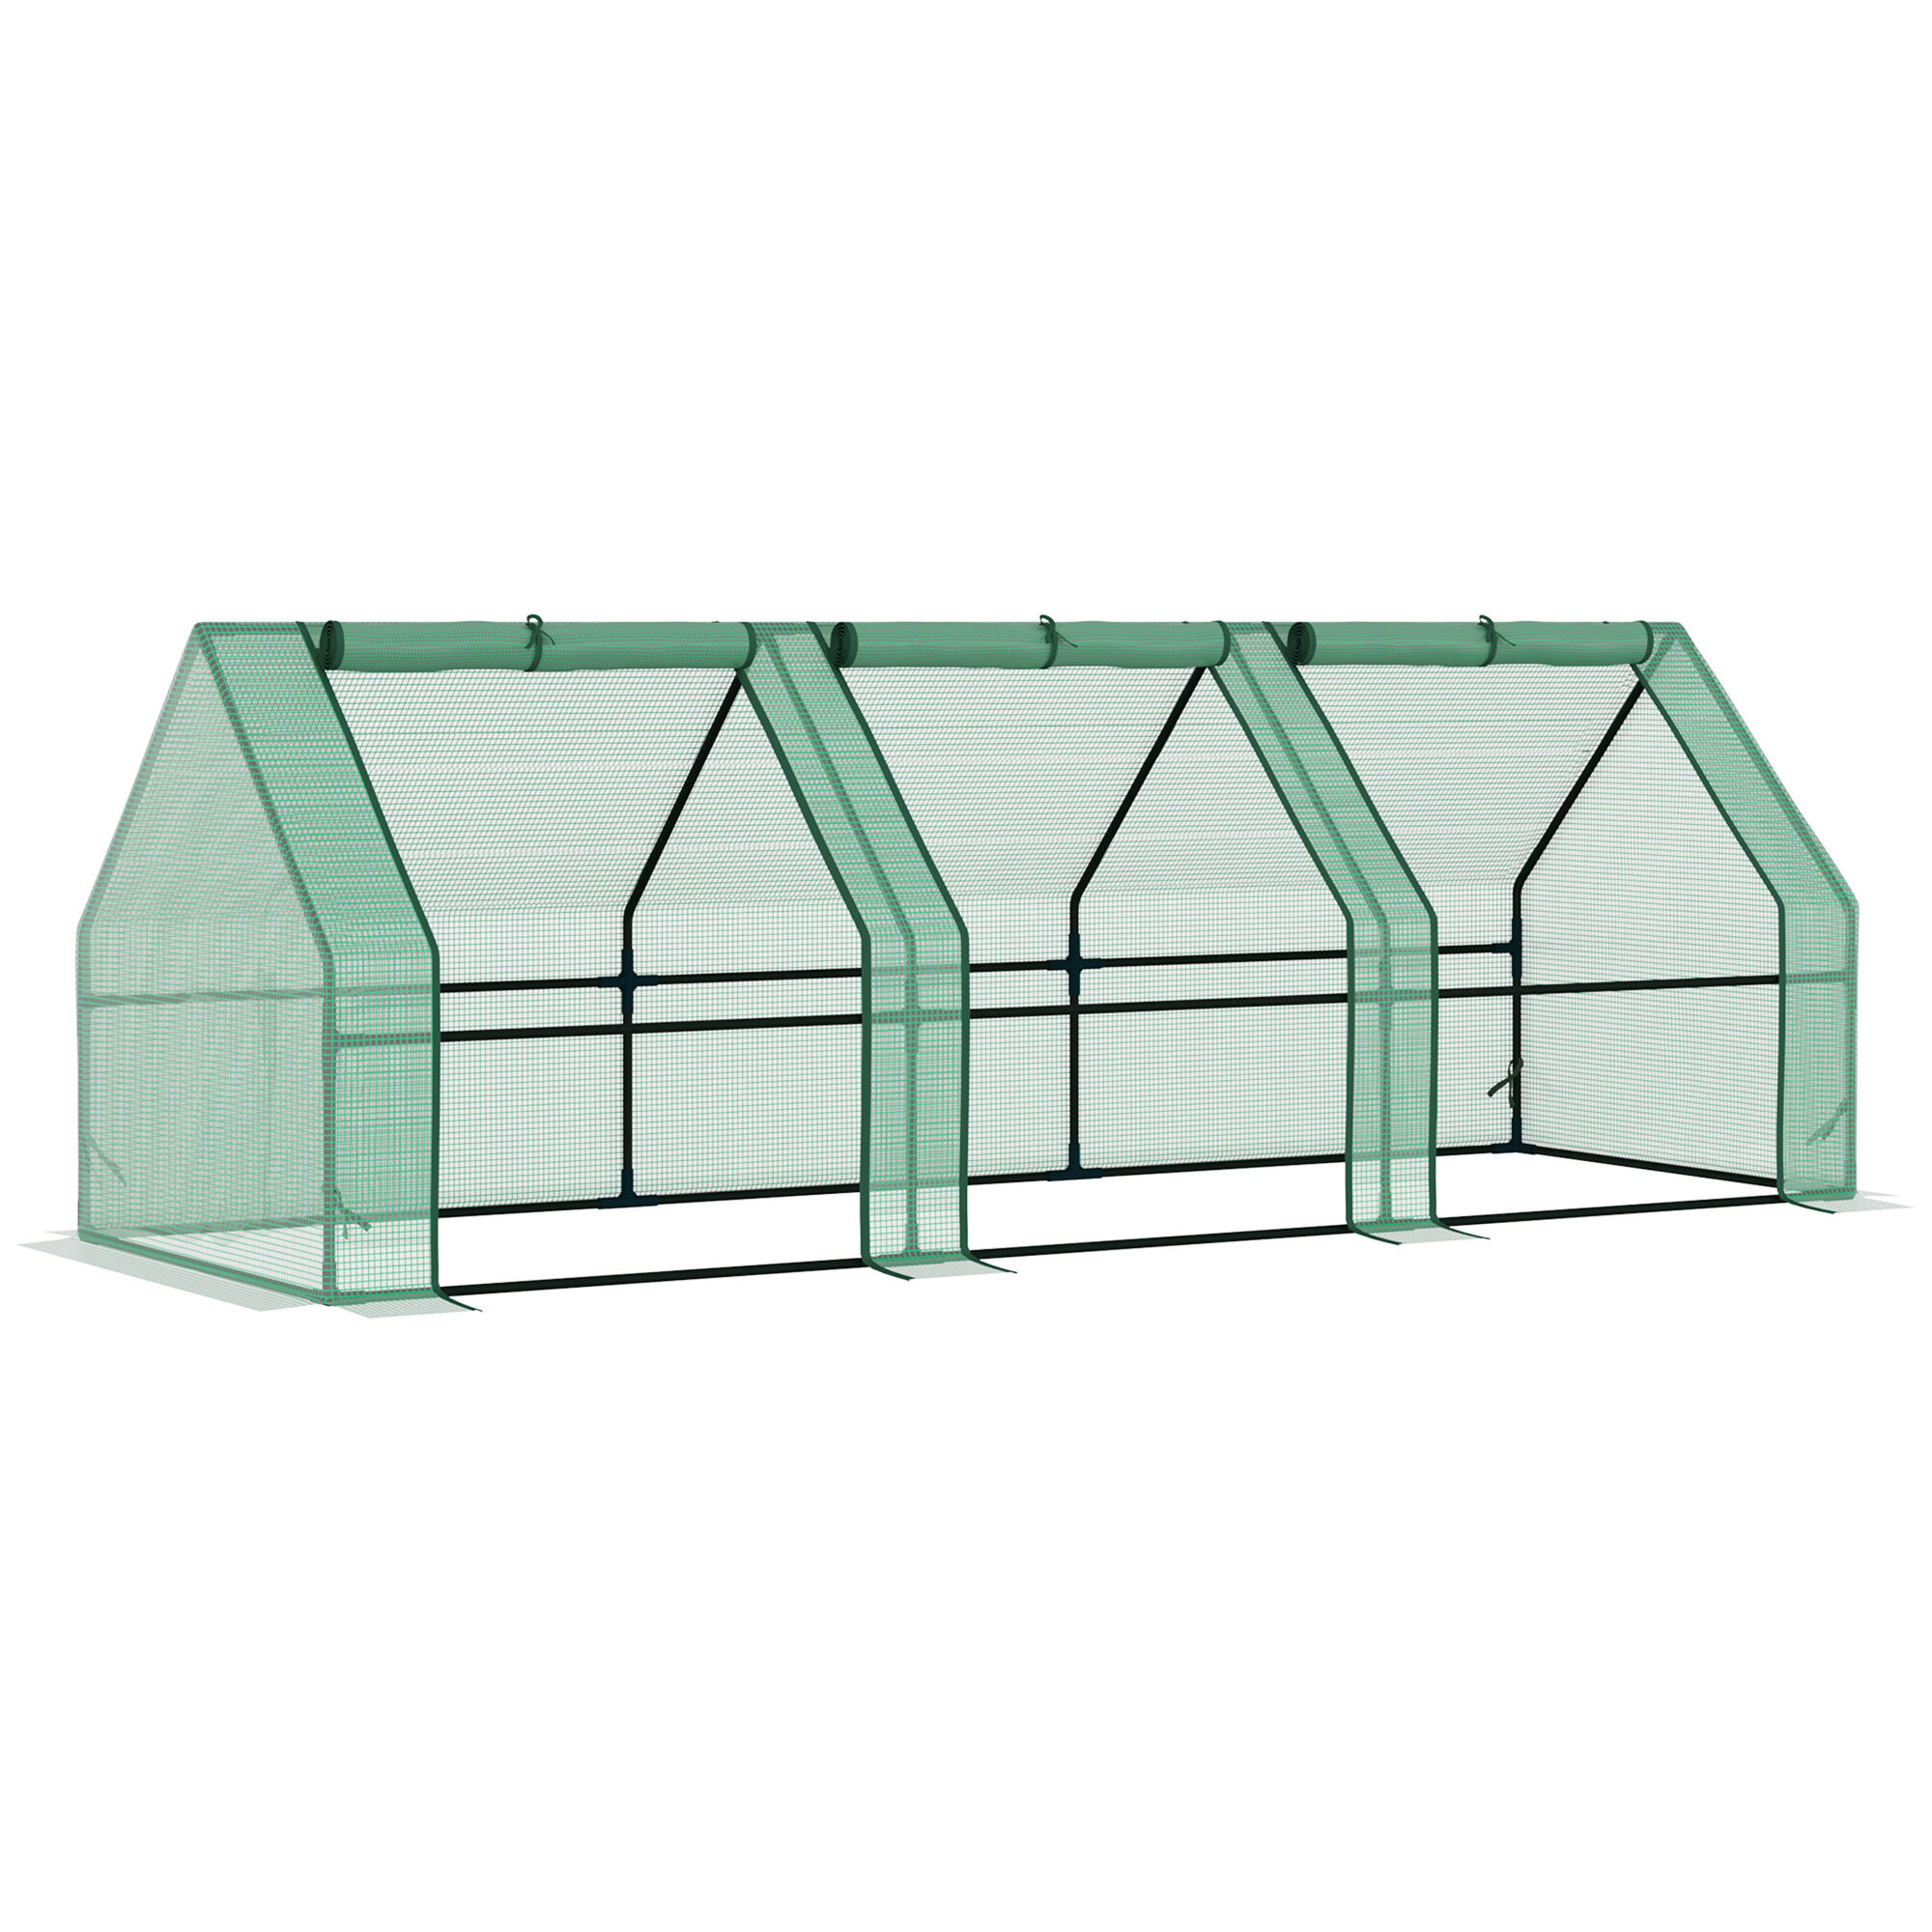 Outsunny 9'L x 3'W x 3'H Portable Greenhouse, Large Zipper Doors, Green - UV Resistant PE Cover, Mini Outdoor Plant House   Aosom.com